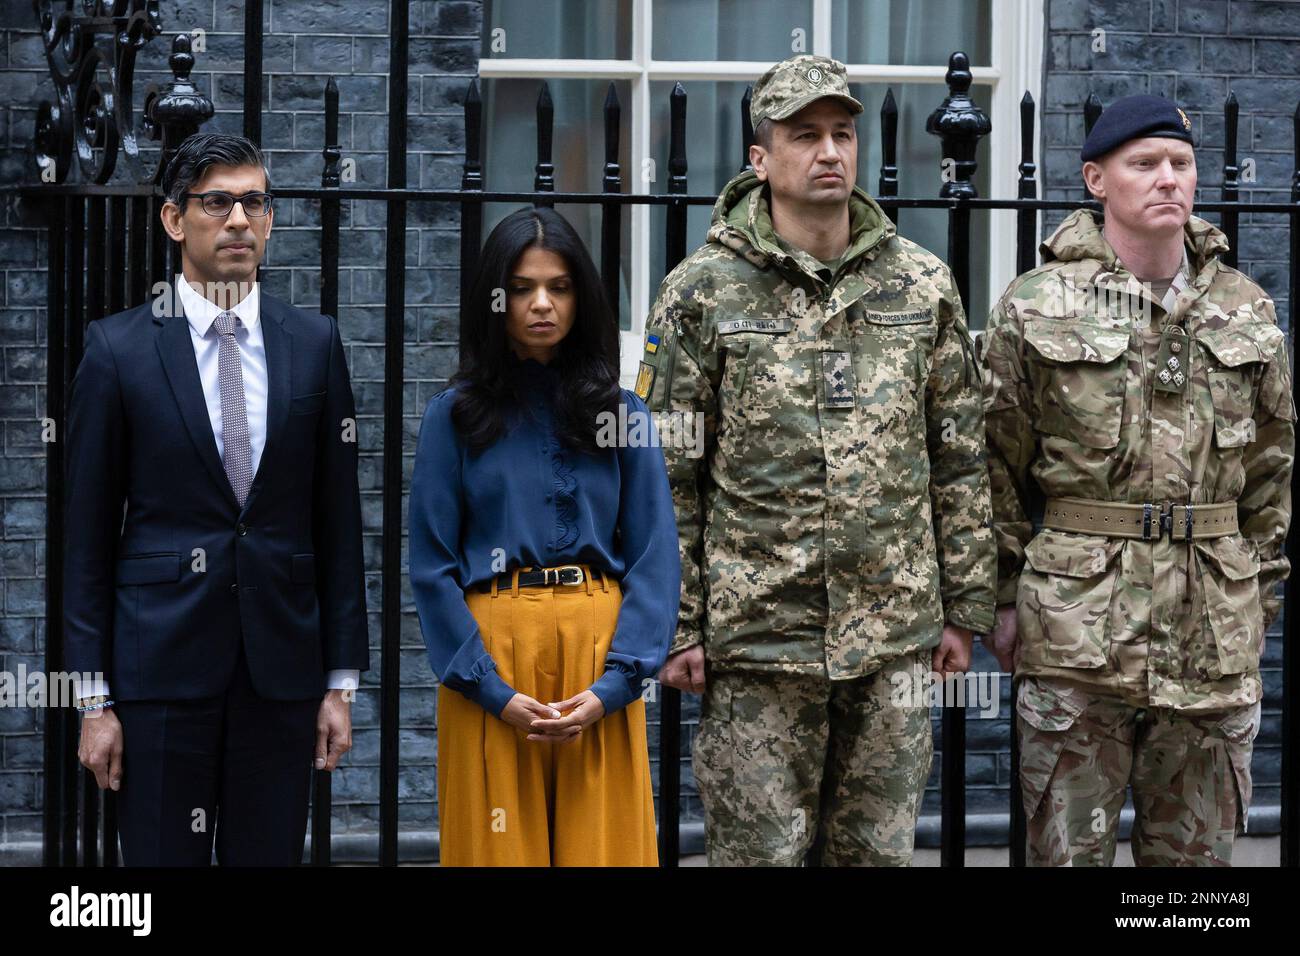 London, UK. 24th Feb, 2023. British Prime Minister Rishi Sunak and his wife Akshata Murthy observe a minute's silence outside 10 Downing Street. The world is marking the one-year anniversary of the full-scale Russian invasion of Ukraine. Credit: SOPA Images Limited/Alamy Live News Stock Photo